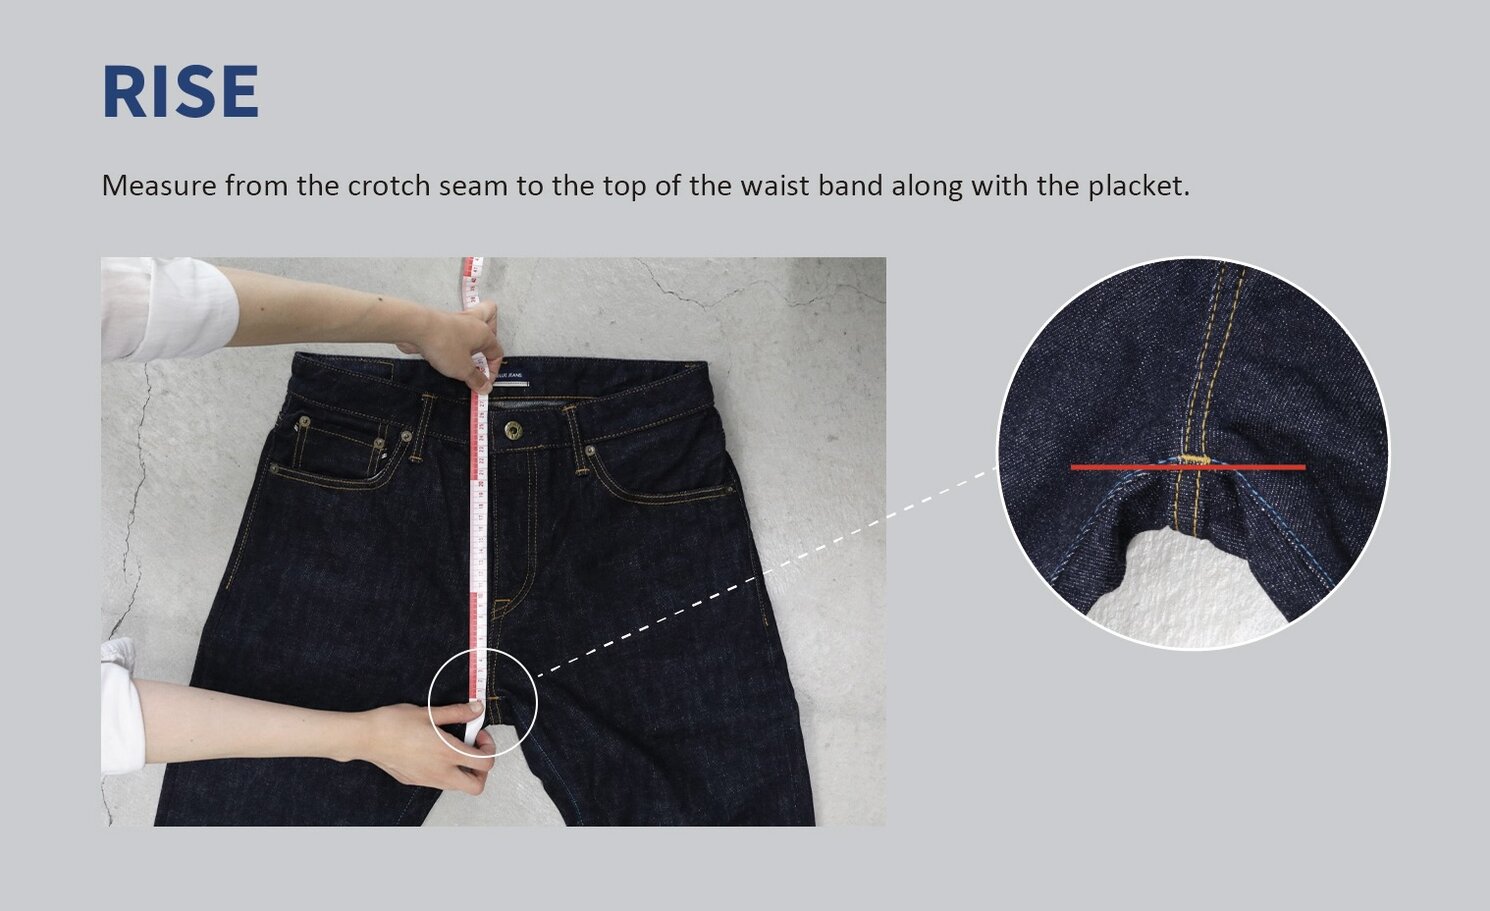 How To Measure Jeans